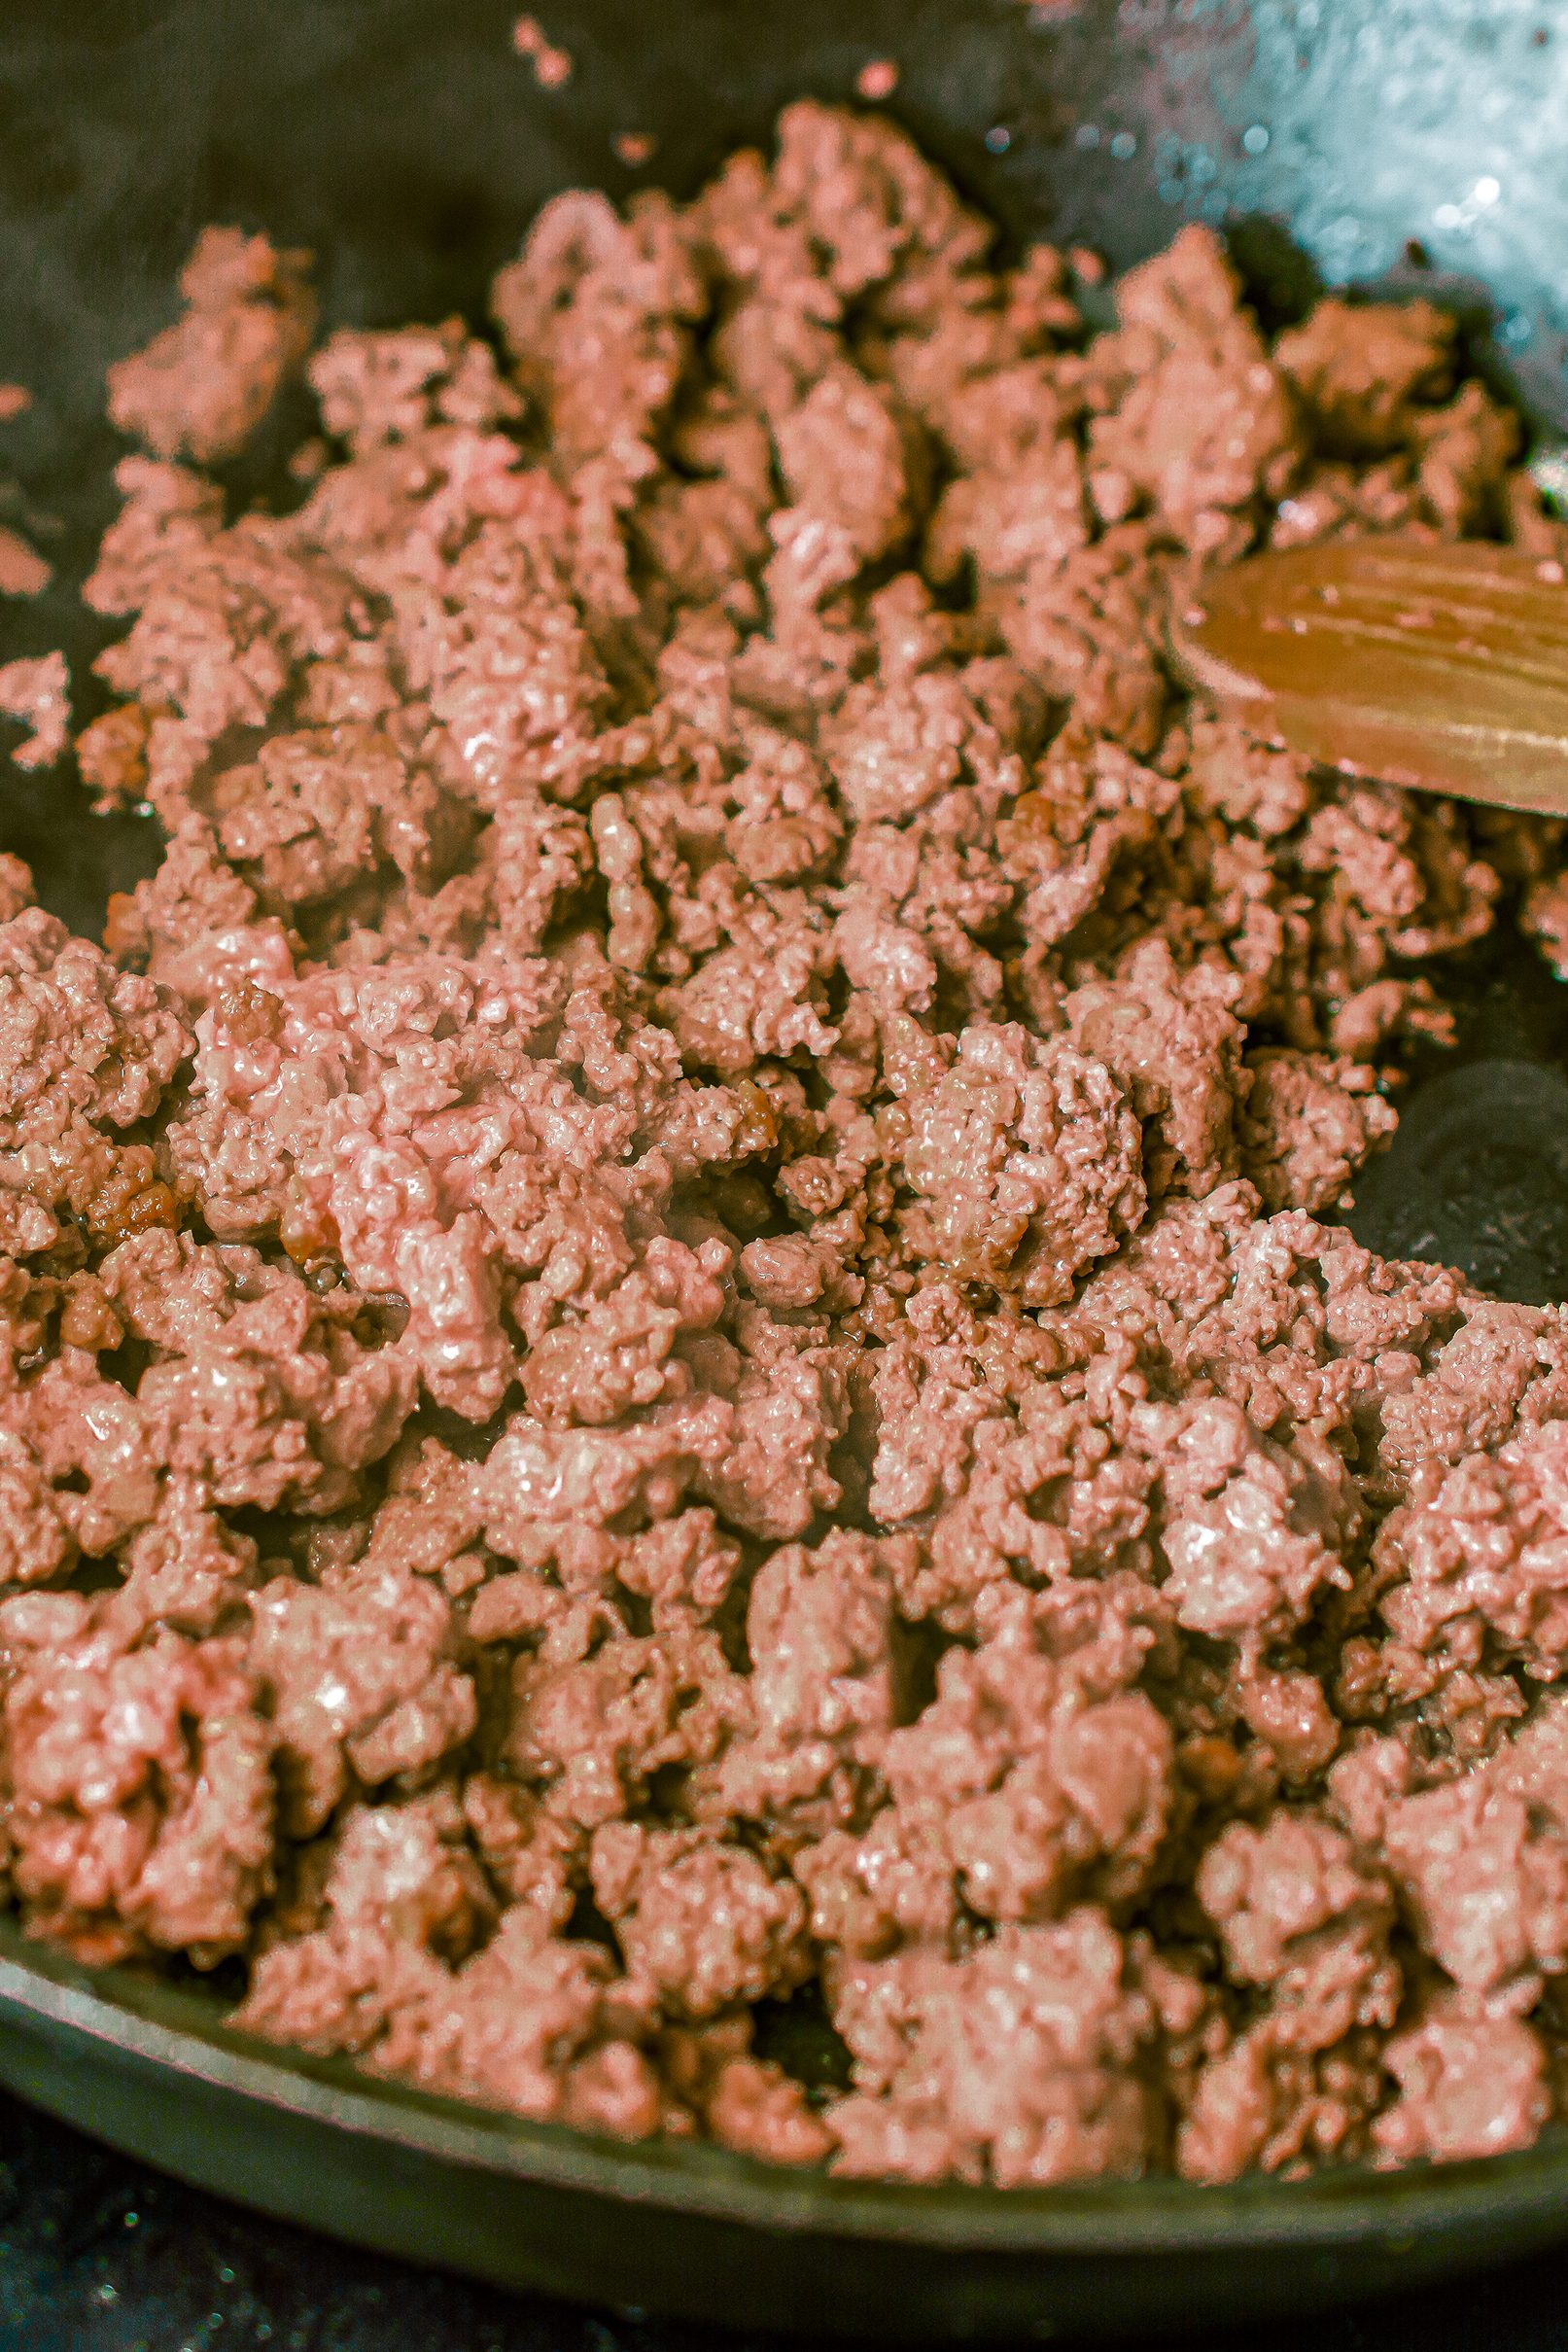 Brown the ground beef in a skillet